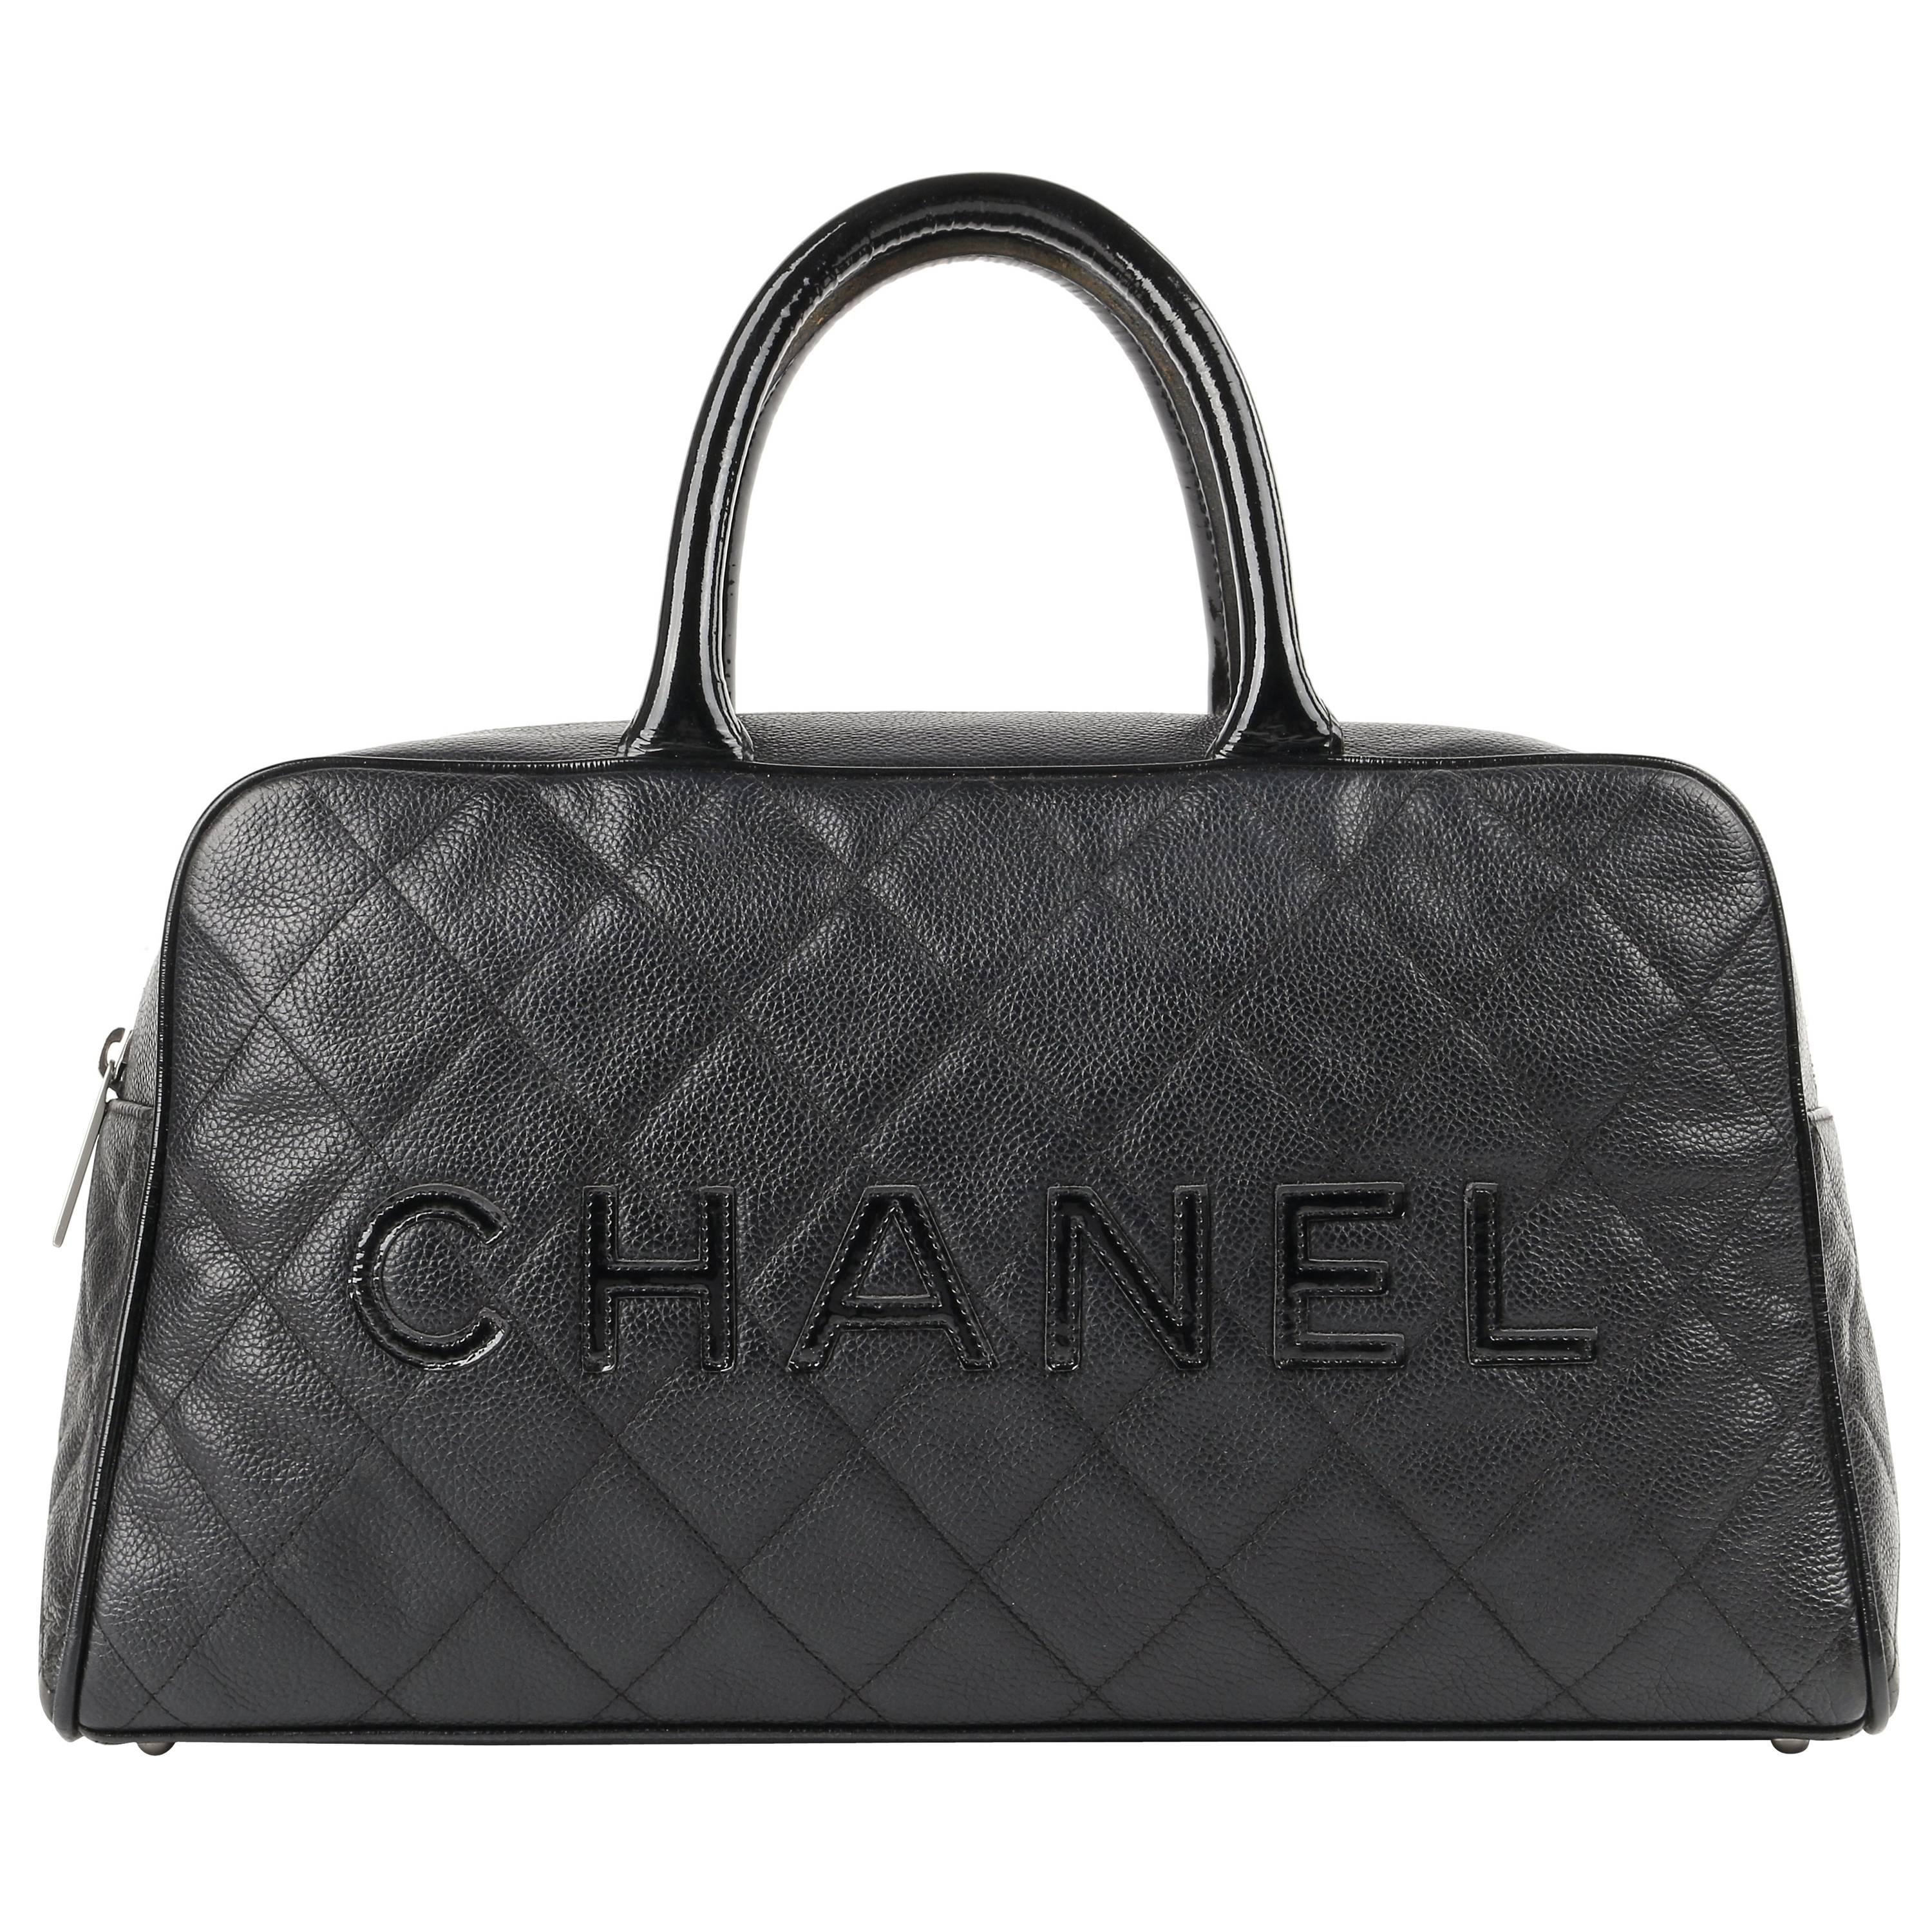 CHANEL Caviar Diamond Quilted & Patent Leather Boston Bowler Bag